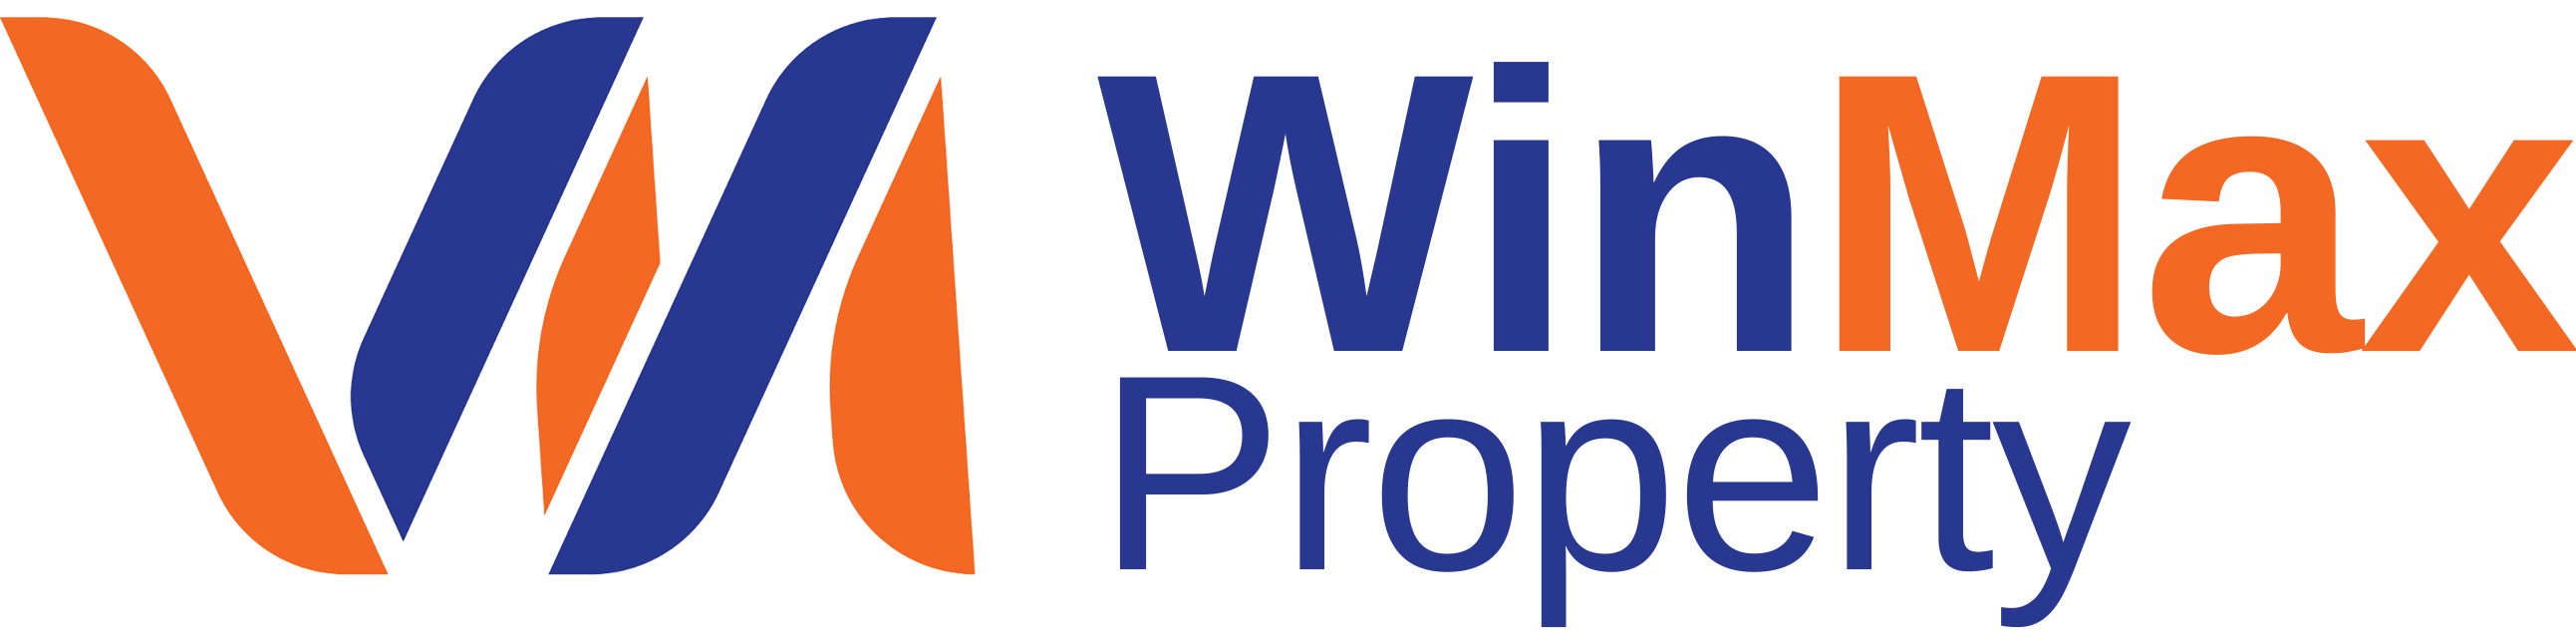 WinMax | Buy - Sell - Rent Property & Corporate Merger